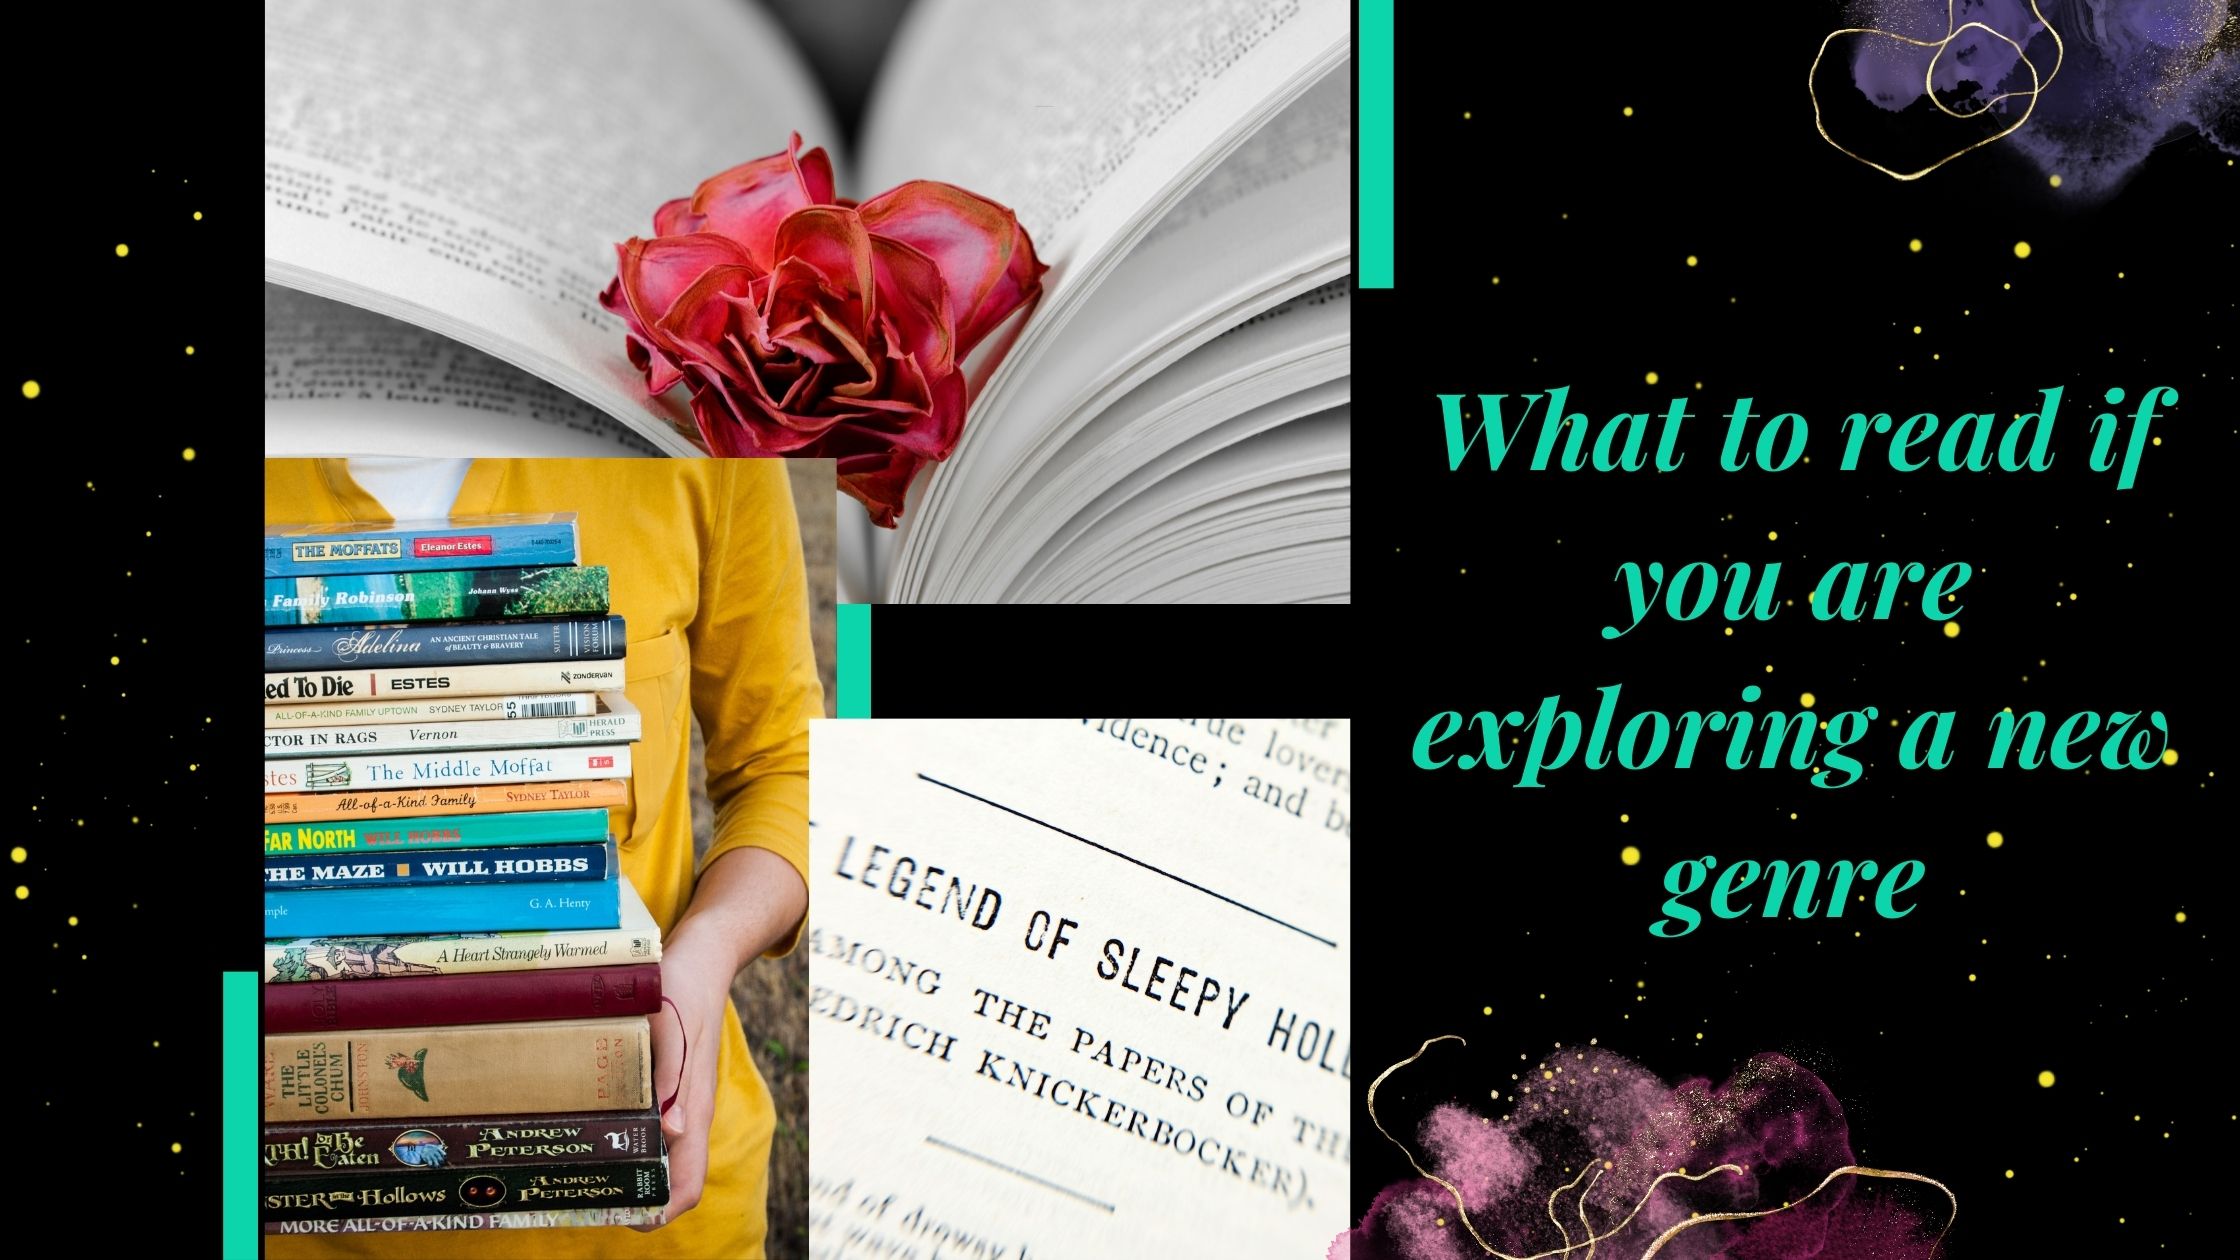 What to read if you are exploring a new genre